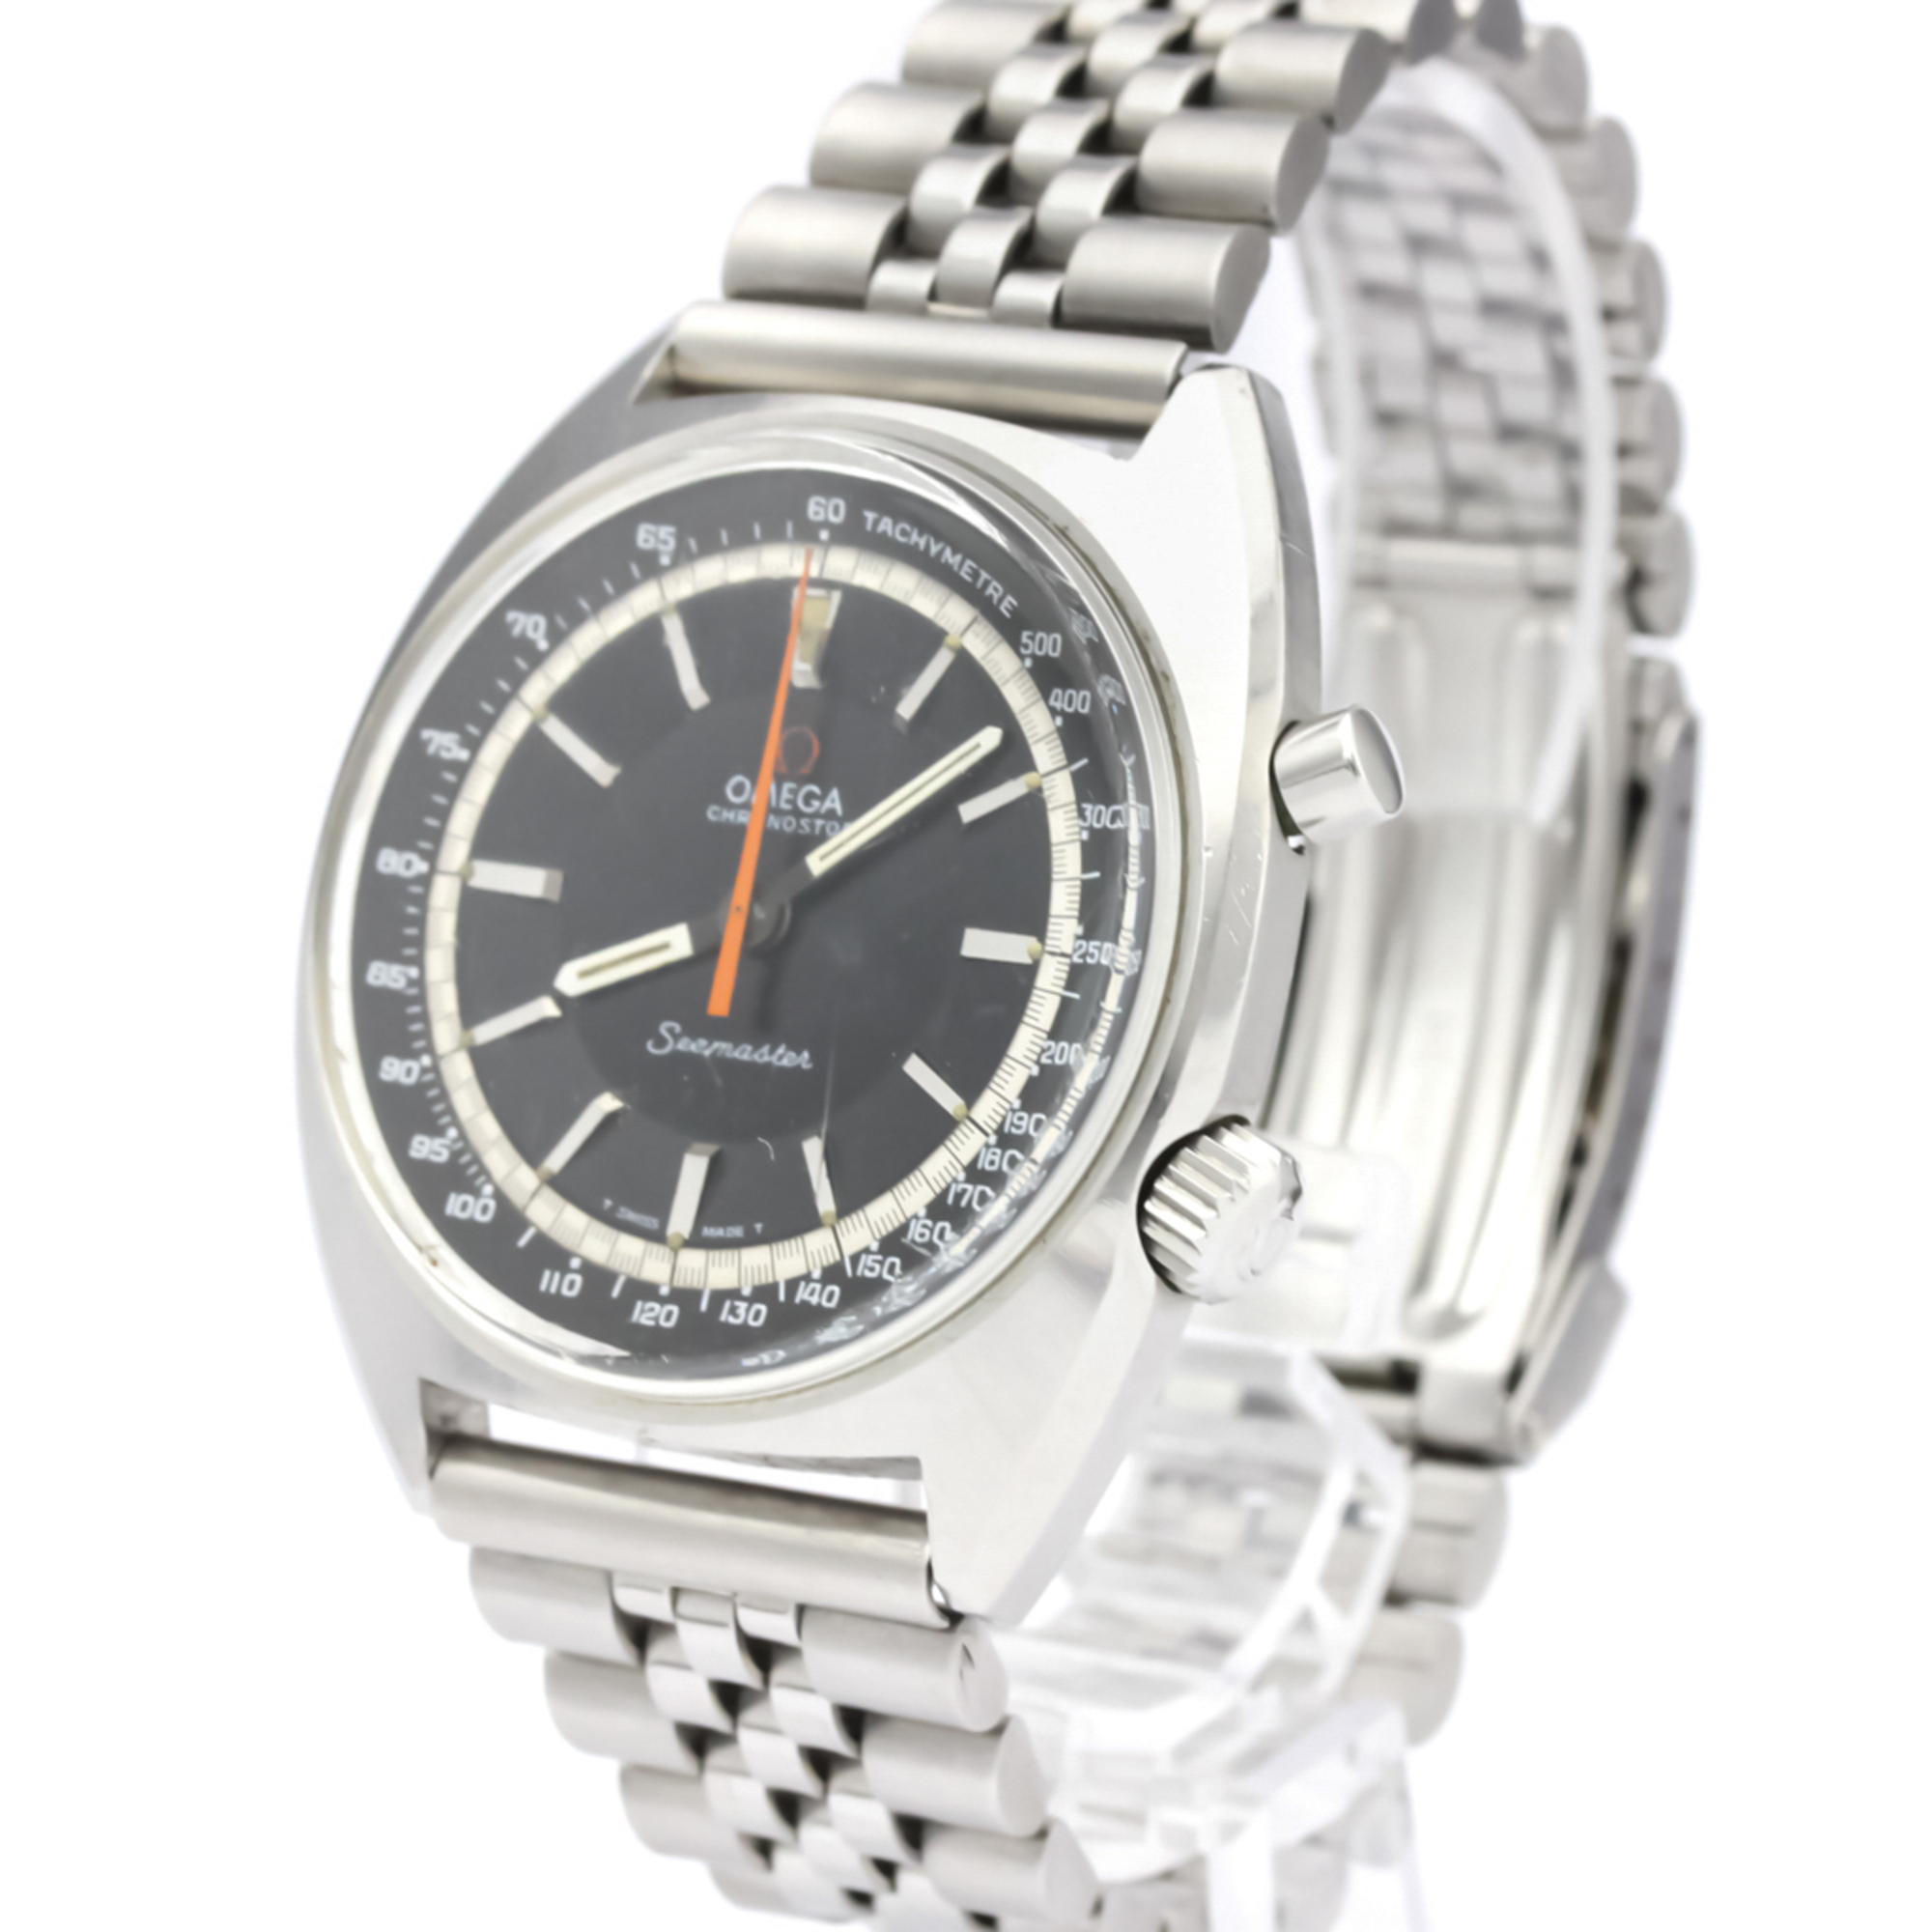 Omega Seamaster Mechanical Stainless Steel Men's Sports Watch 145.007